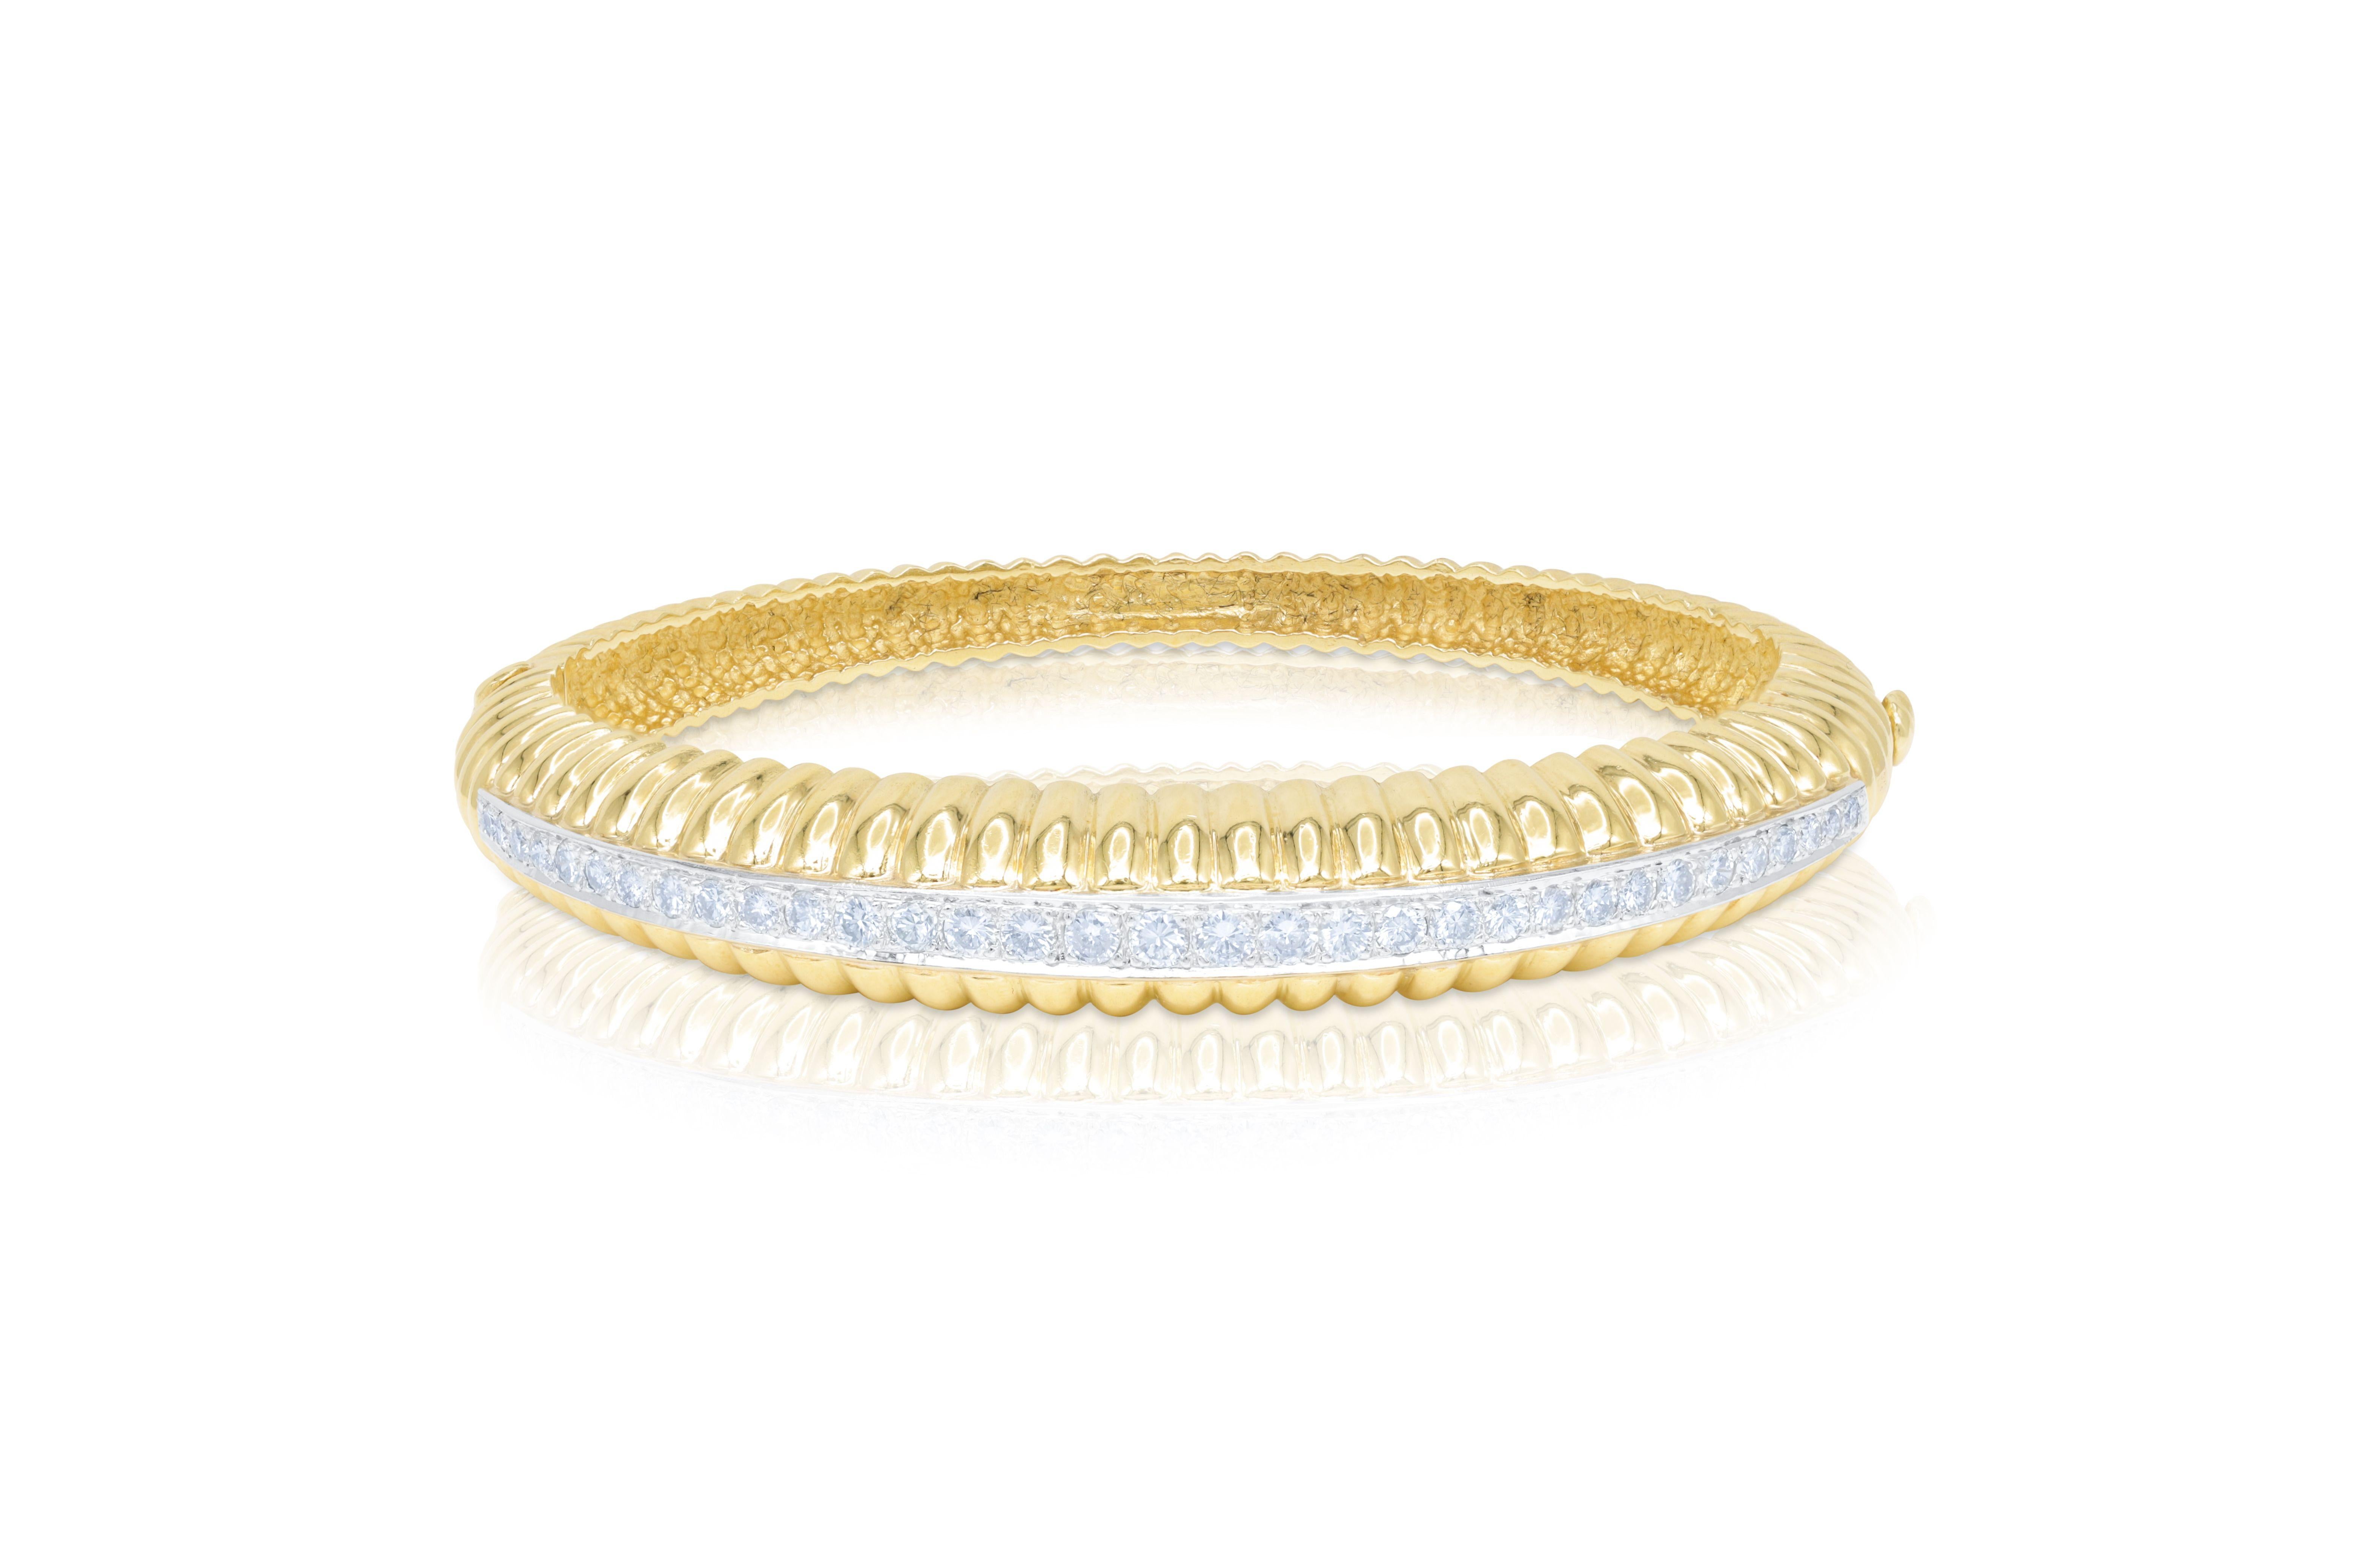 18 kt yellow gold bangle bracelet adorned with a center strip of 18 kt white gold adorned with 1.60 cts tw of diamonds